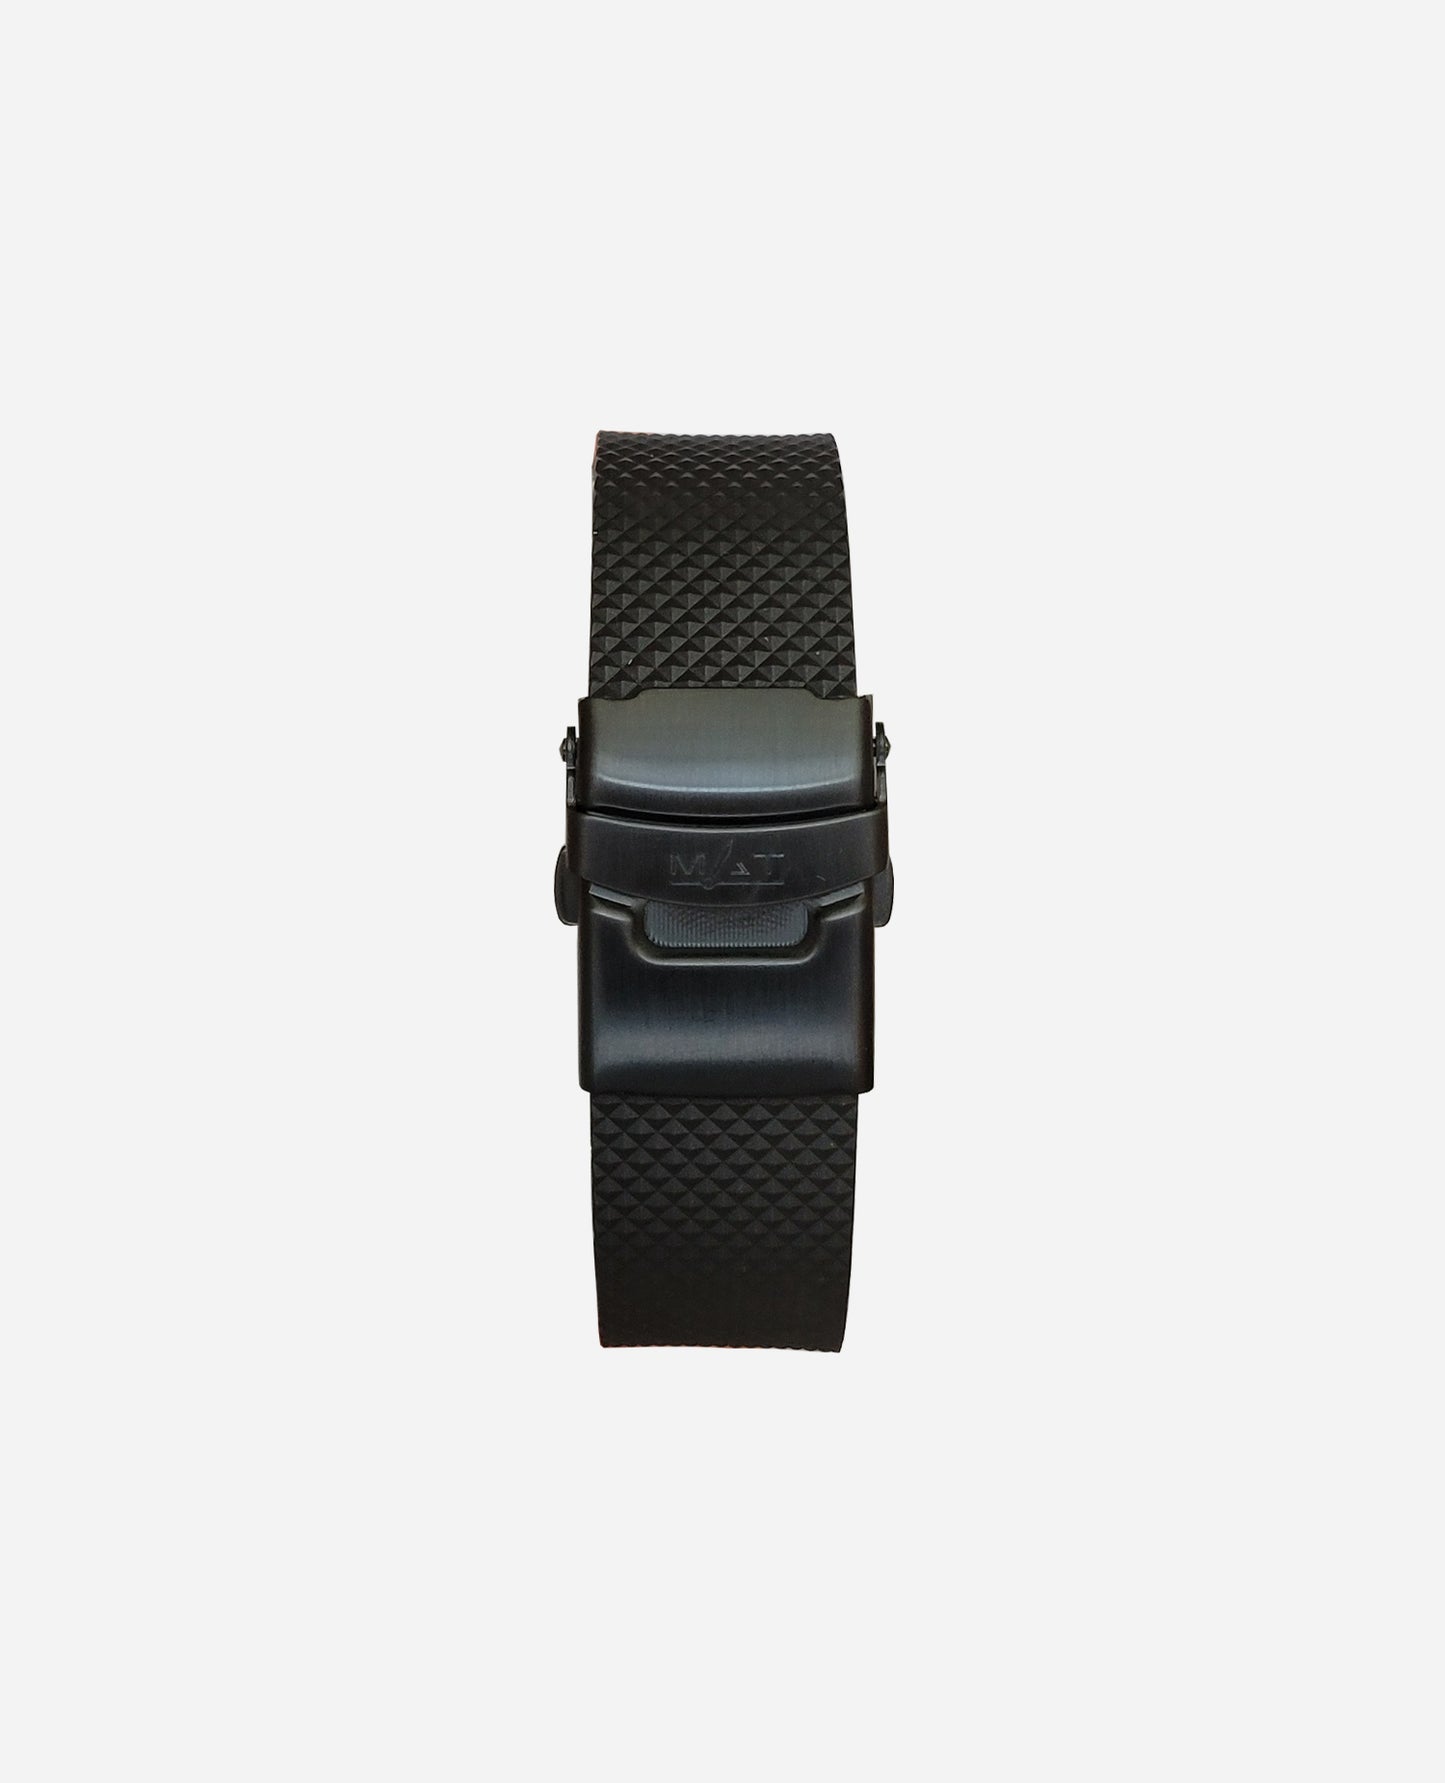 BLACK RUBBER 24 X 20 MM - CLASP BUCKLE